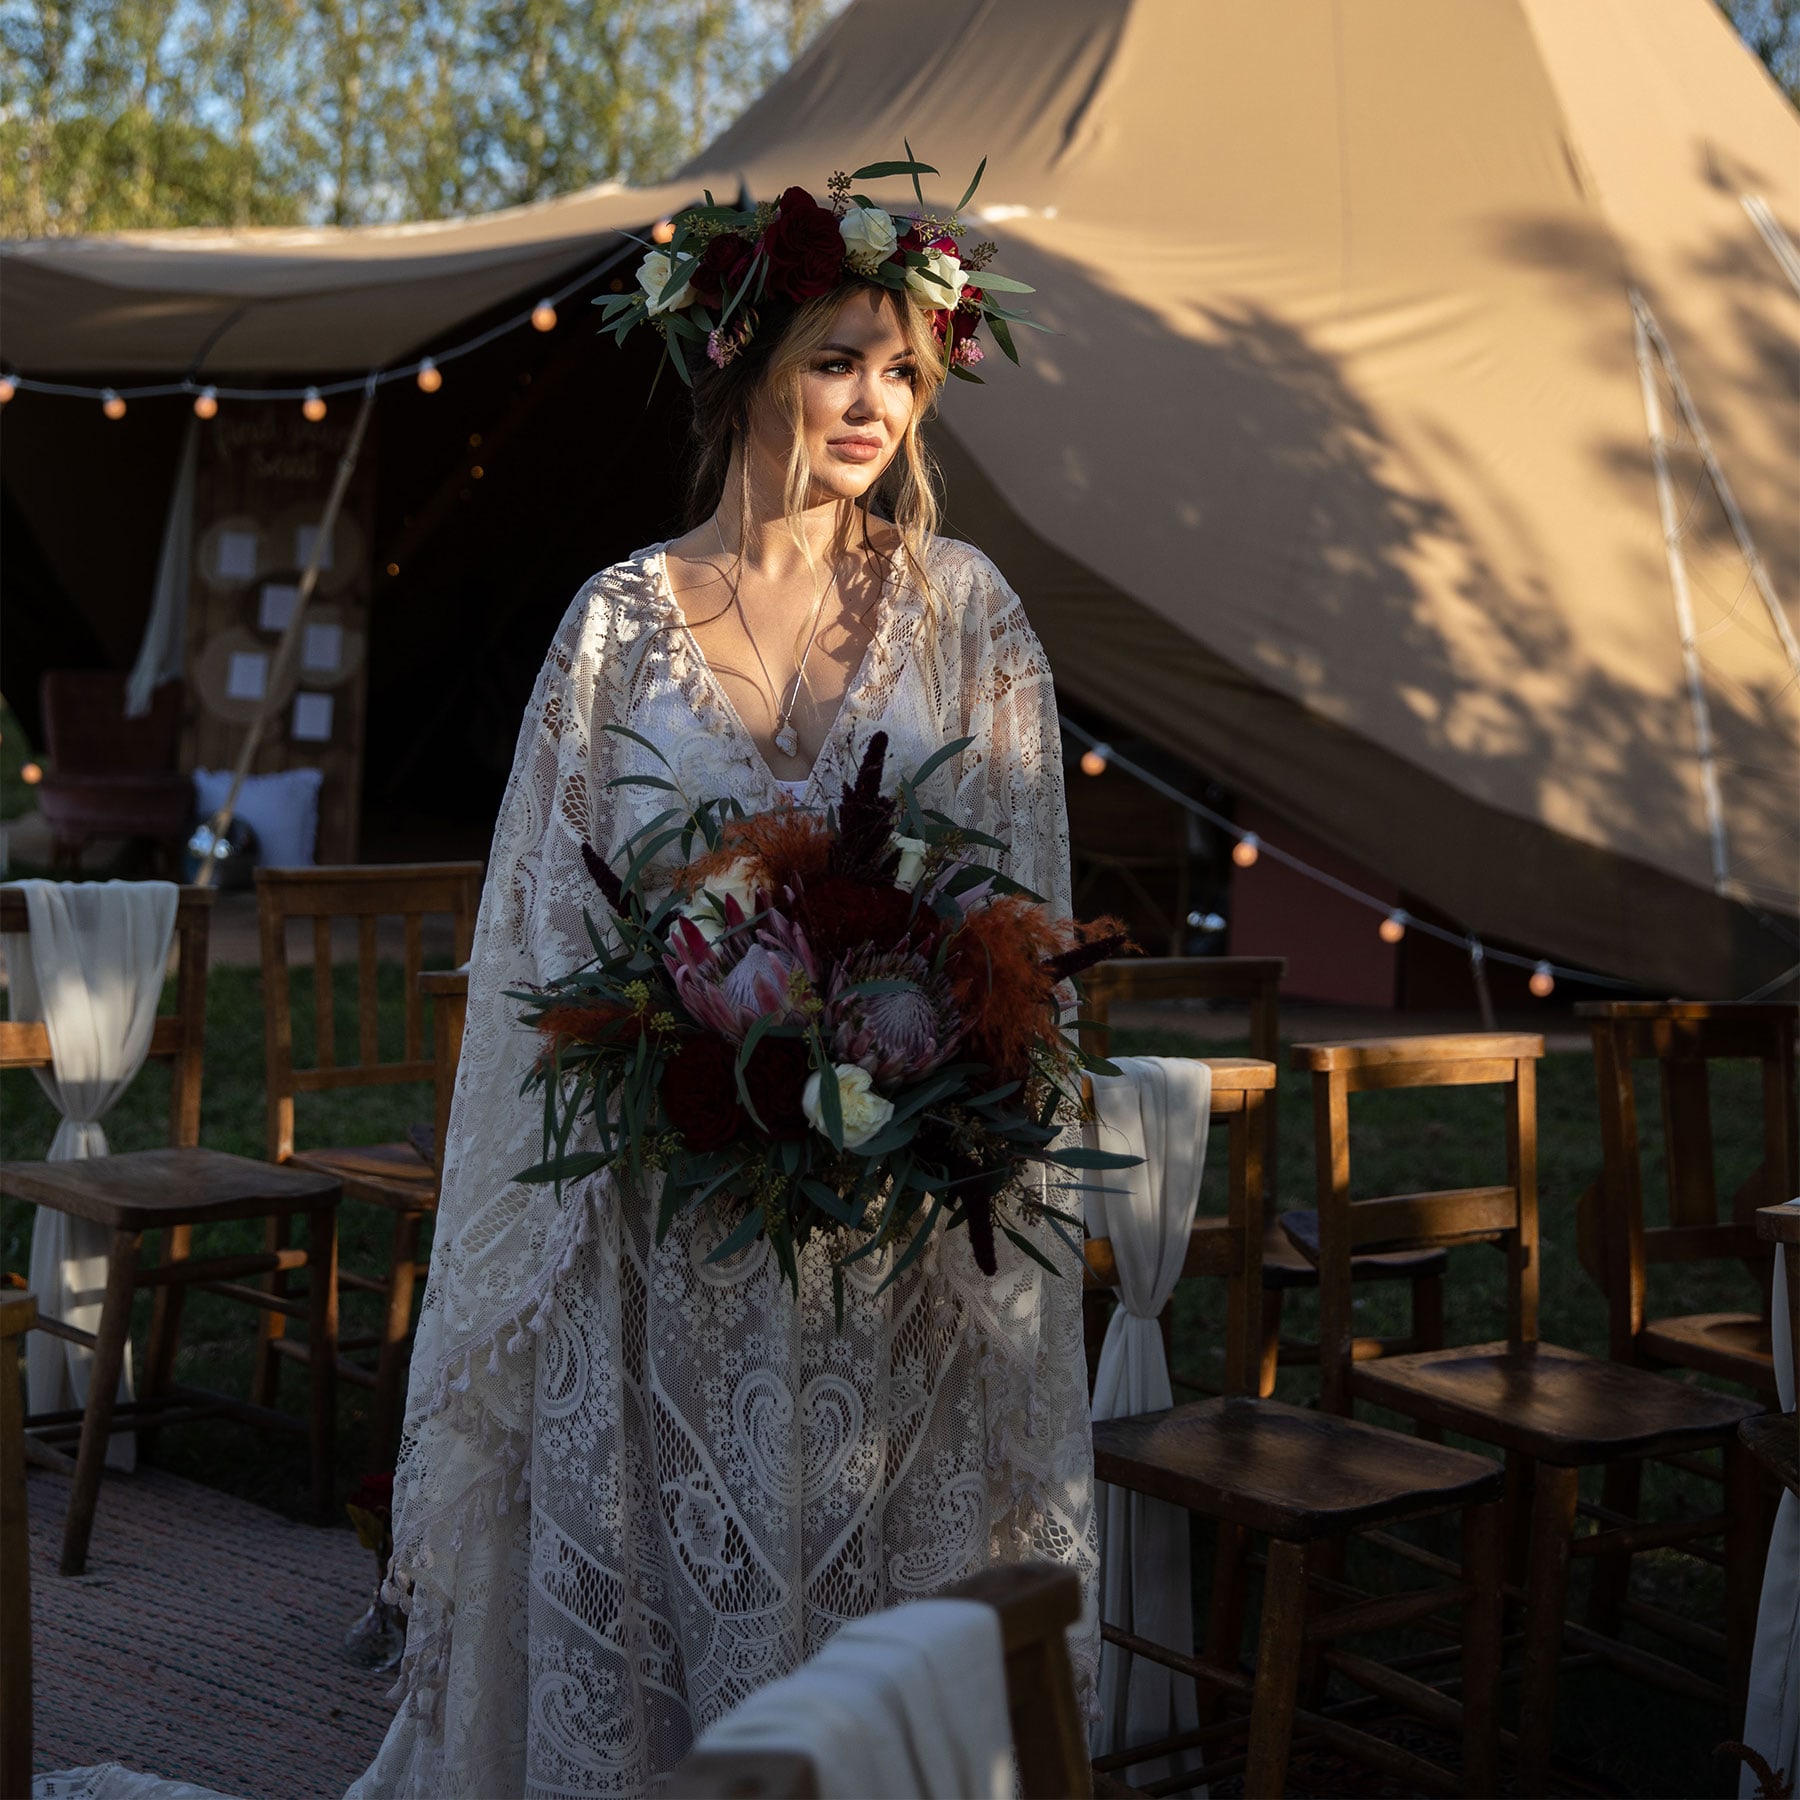 The Emily Edit - Wedding Content Creator in Nottingham and East Midlands